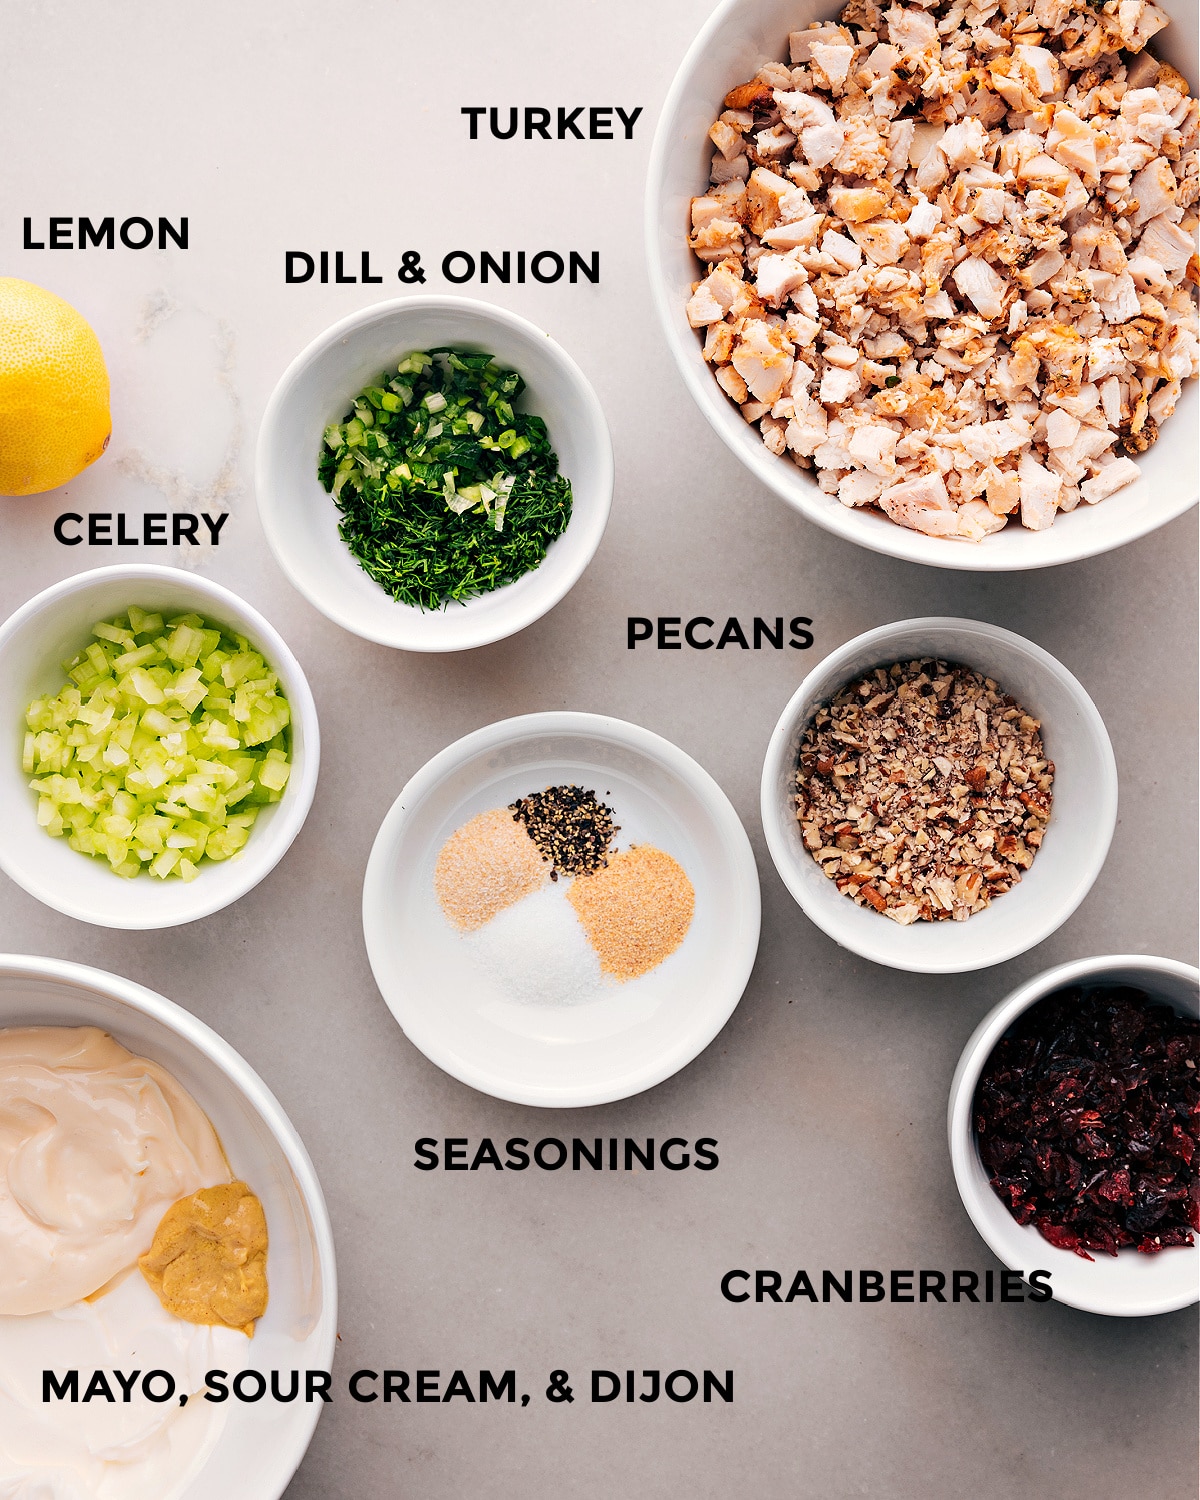 Ingredients for this recipe, including pecans, celery, various seasonings, and more.